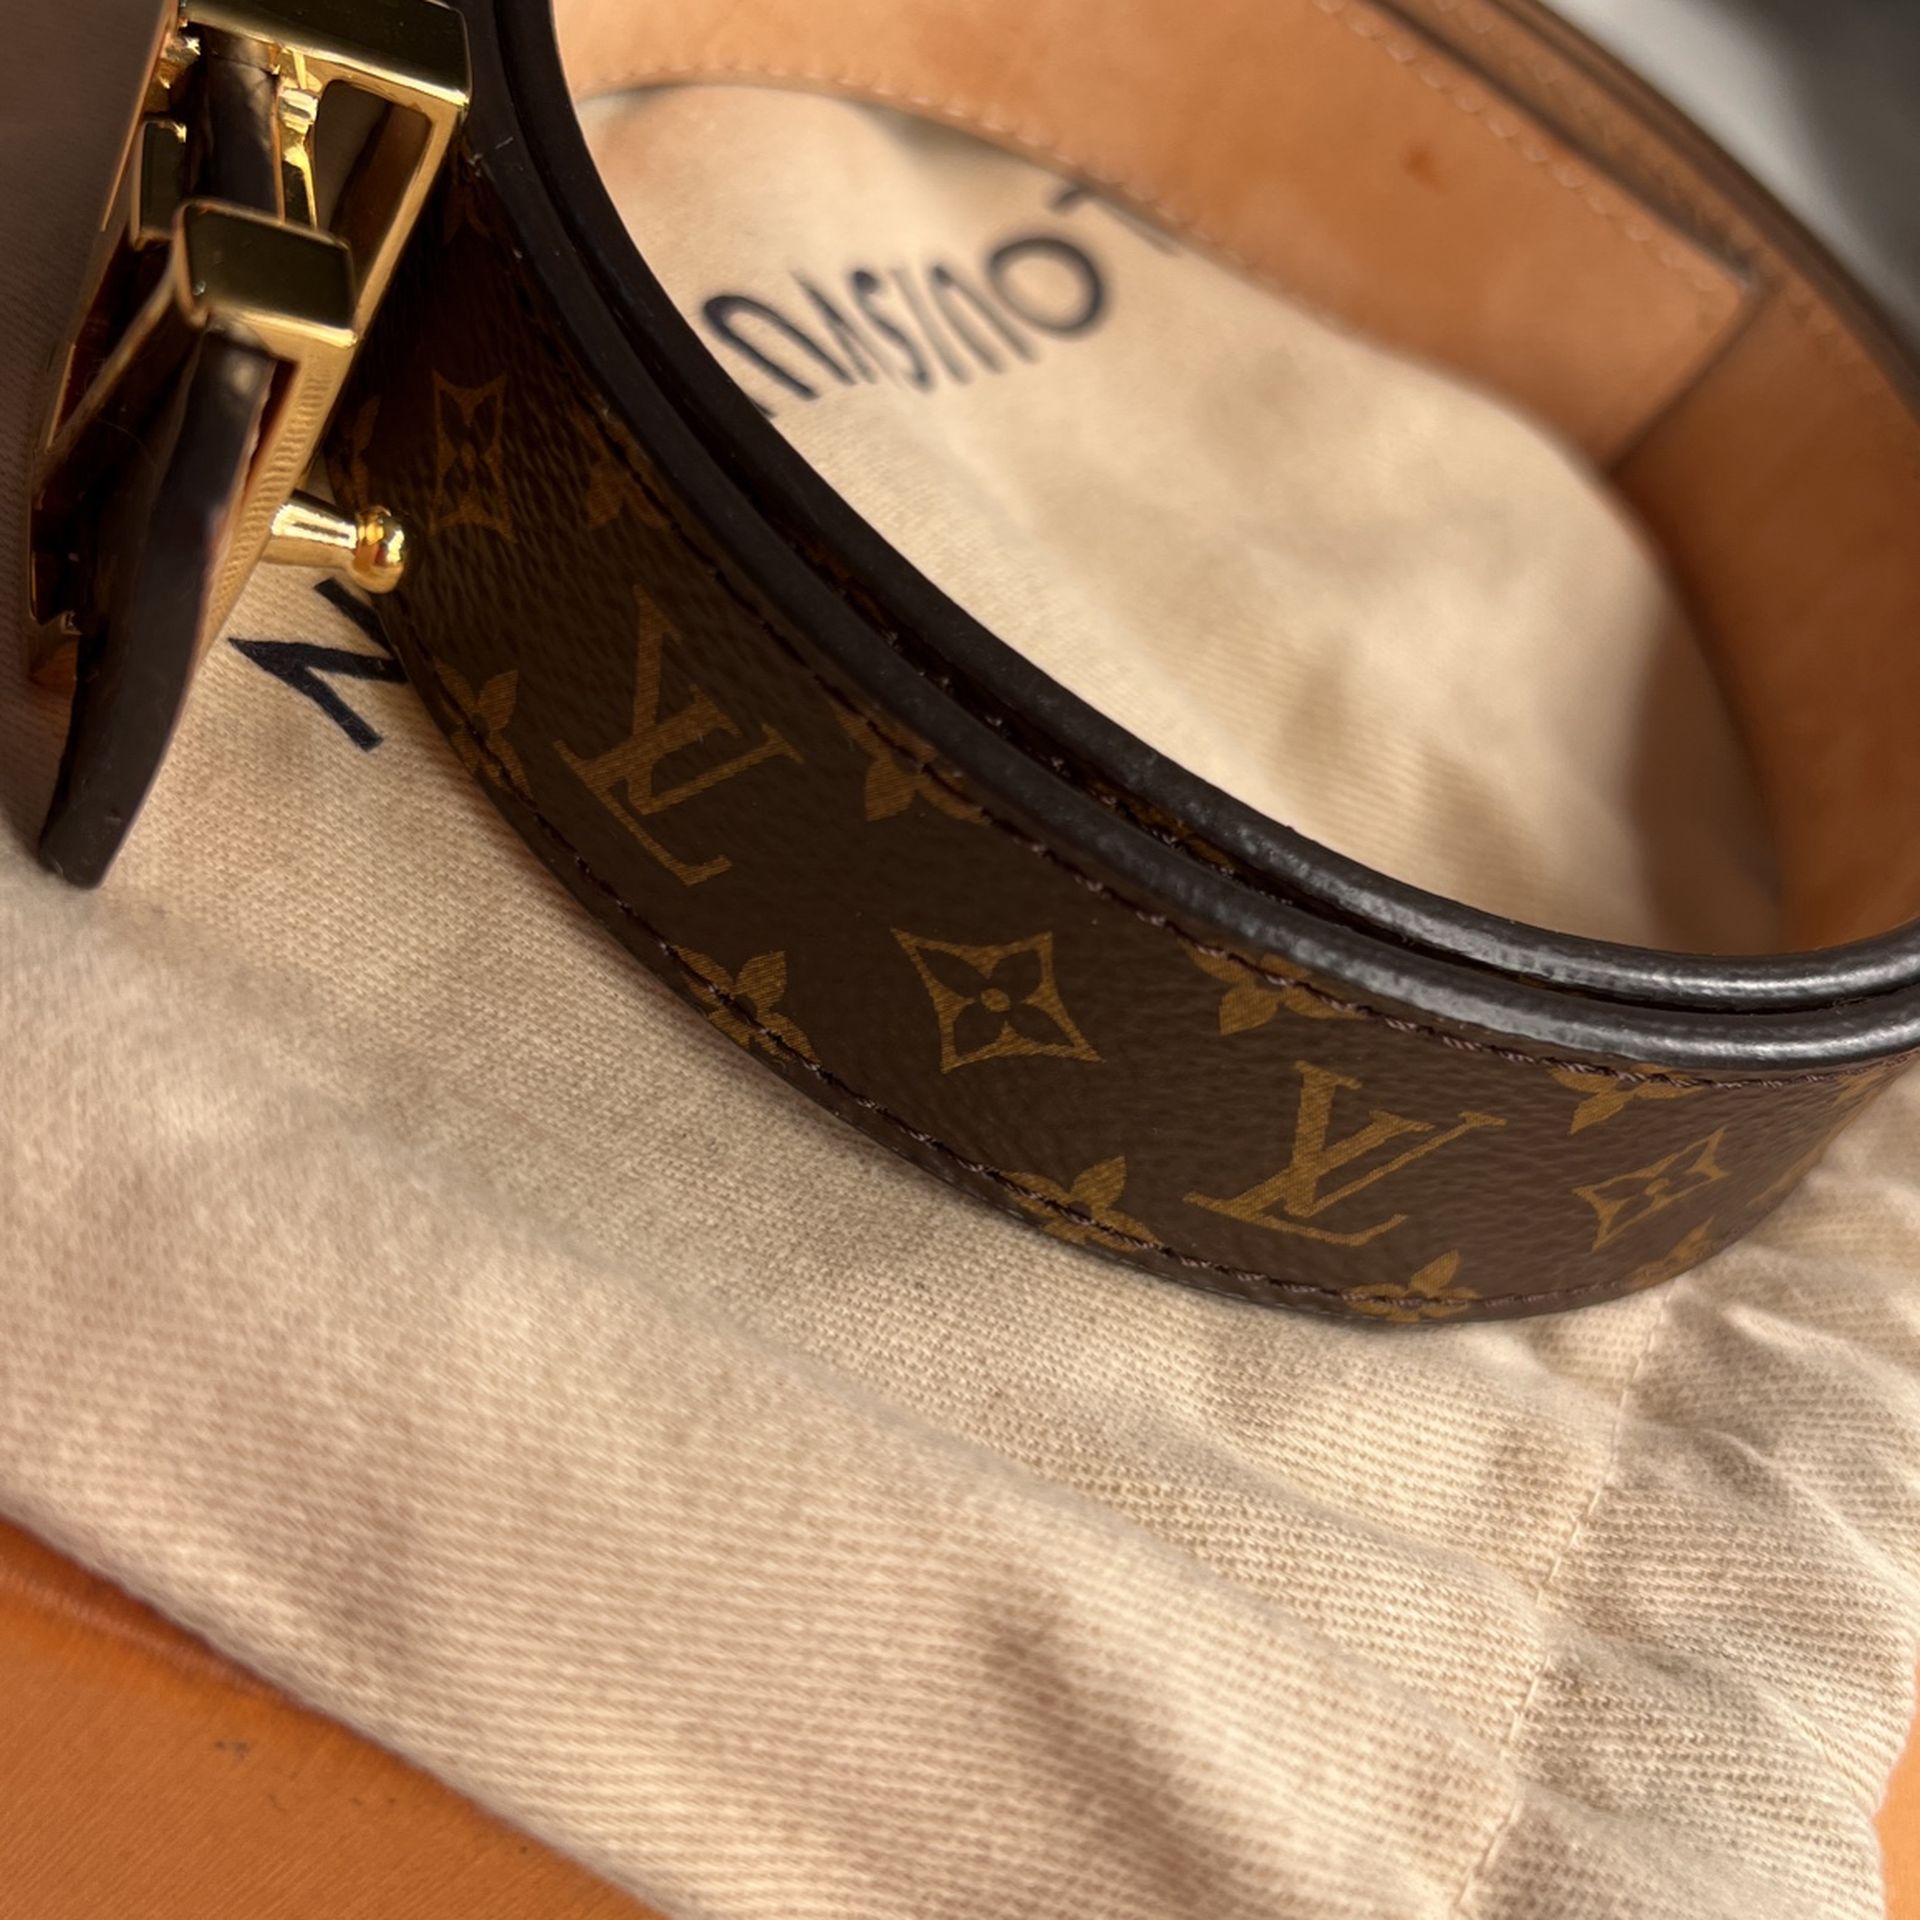 Louis Vuitton Belt . Size 32 Authentic From LV Store At Galleria for Sale  in Houston, TX - OfferUp